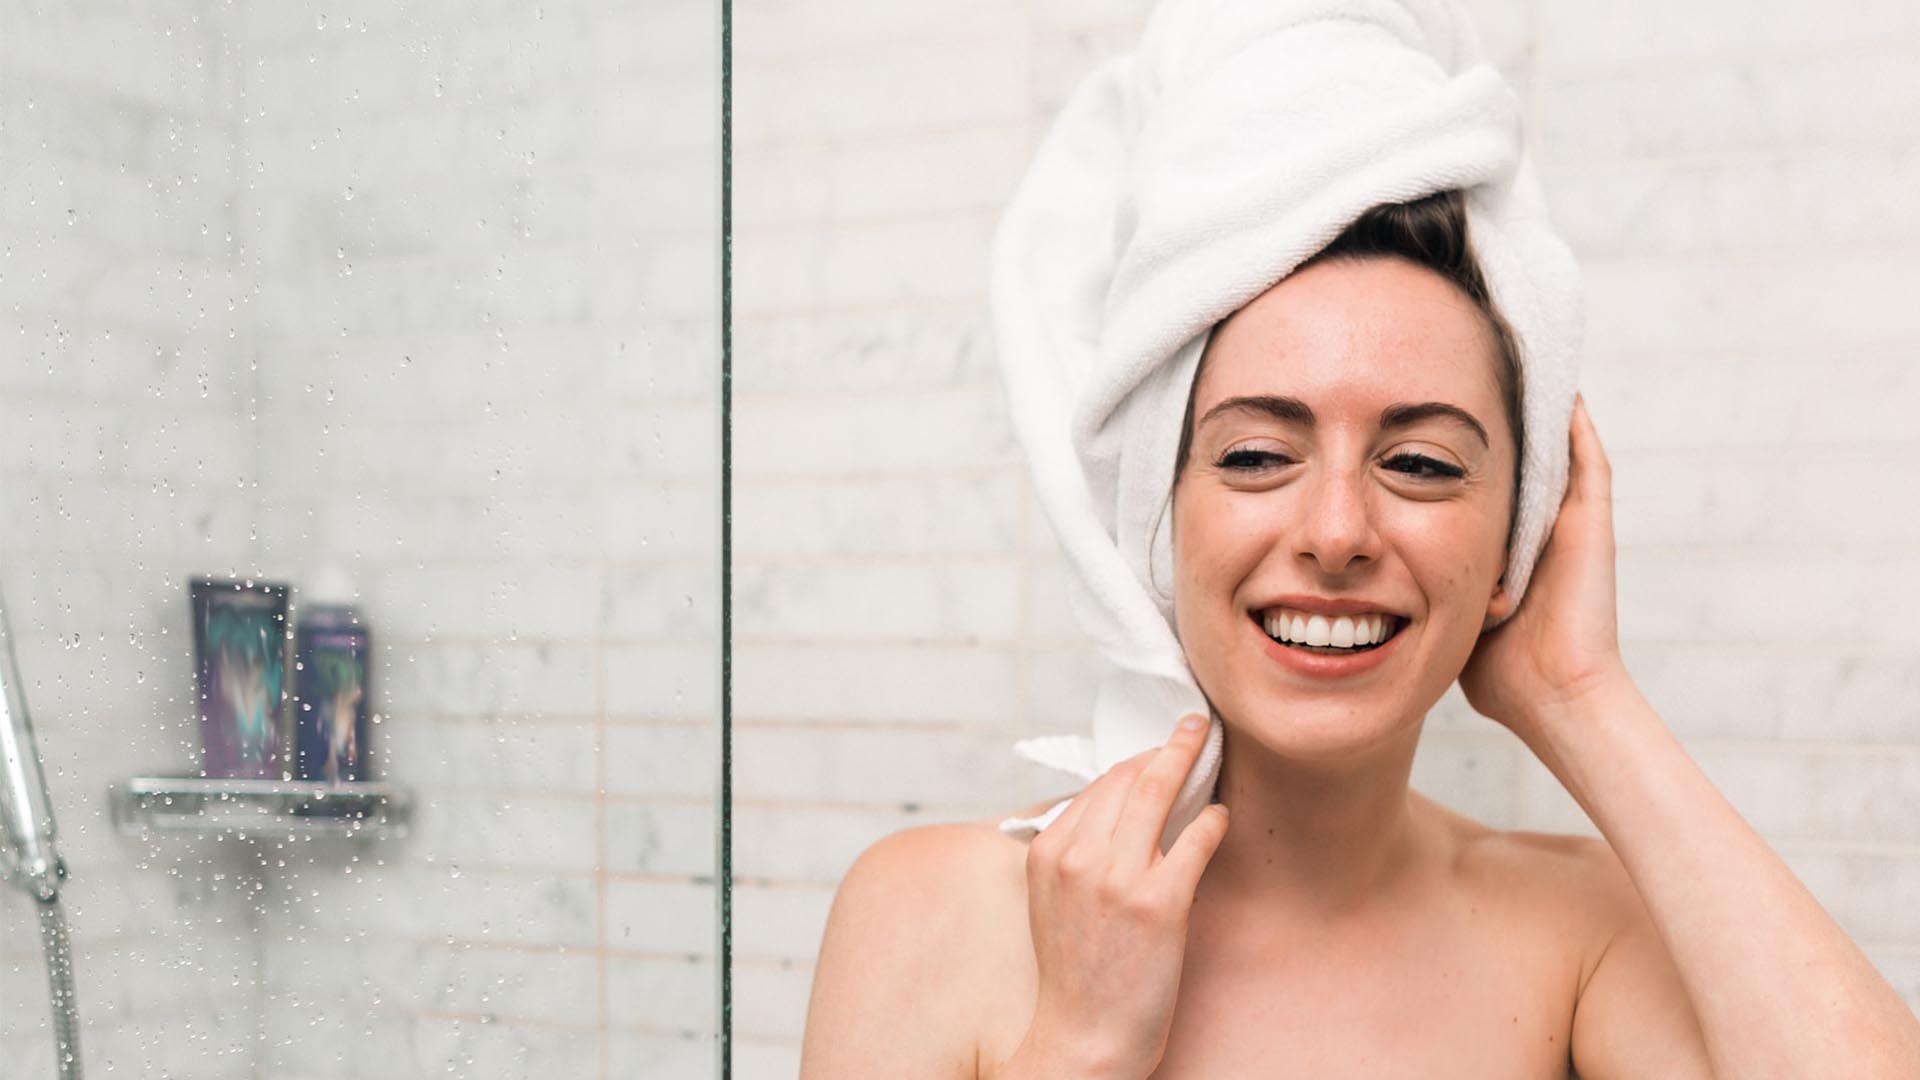 shrink your pores with these tips